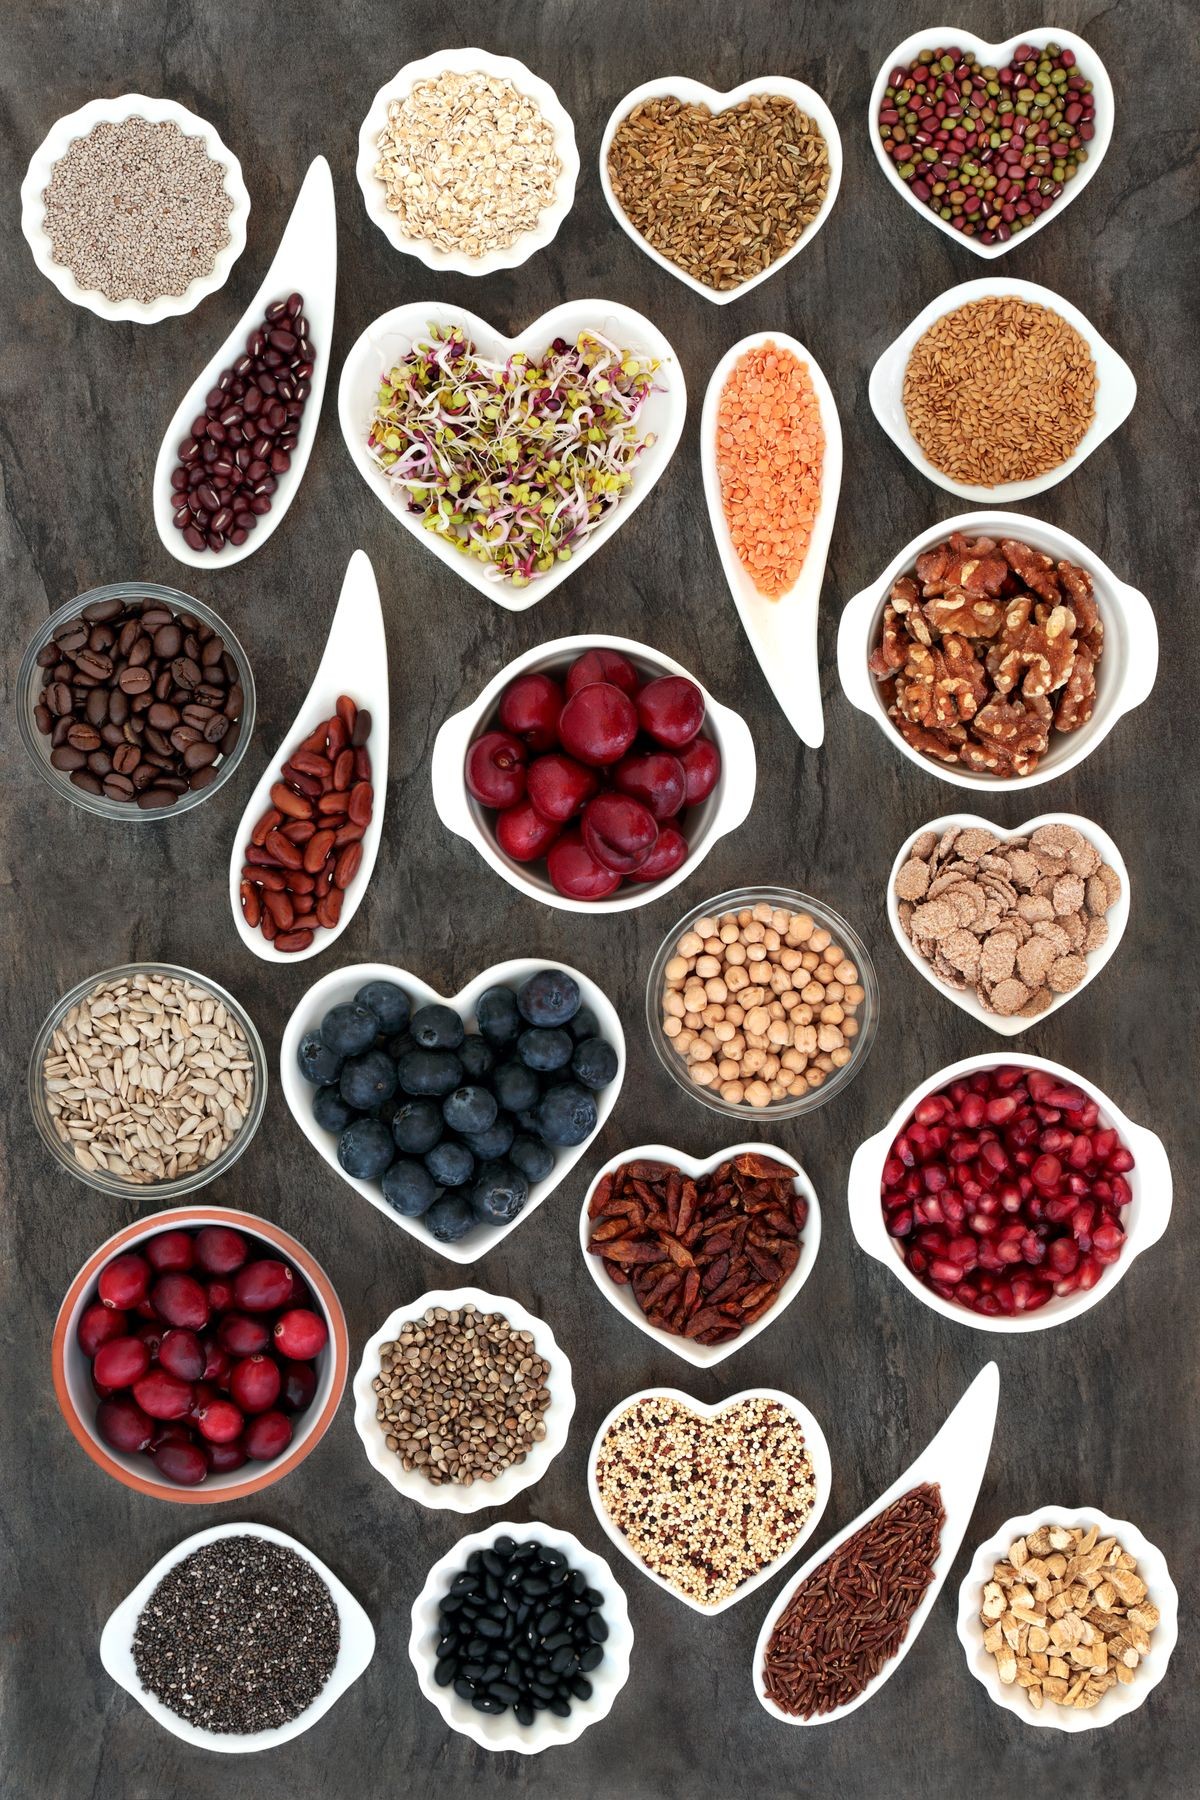 Vegan and vegetarian dried and fresh health food with fruit, vegetables, cereals, nuts, seeds, coffee, grains and herbs with super foods high in antioxidants, anthocyanins, dietary fibre and vitamins.